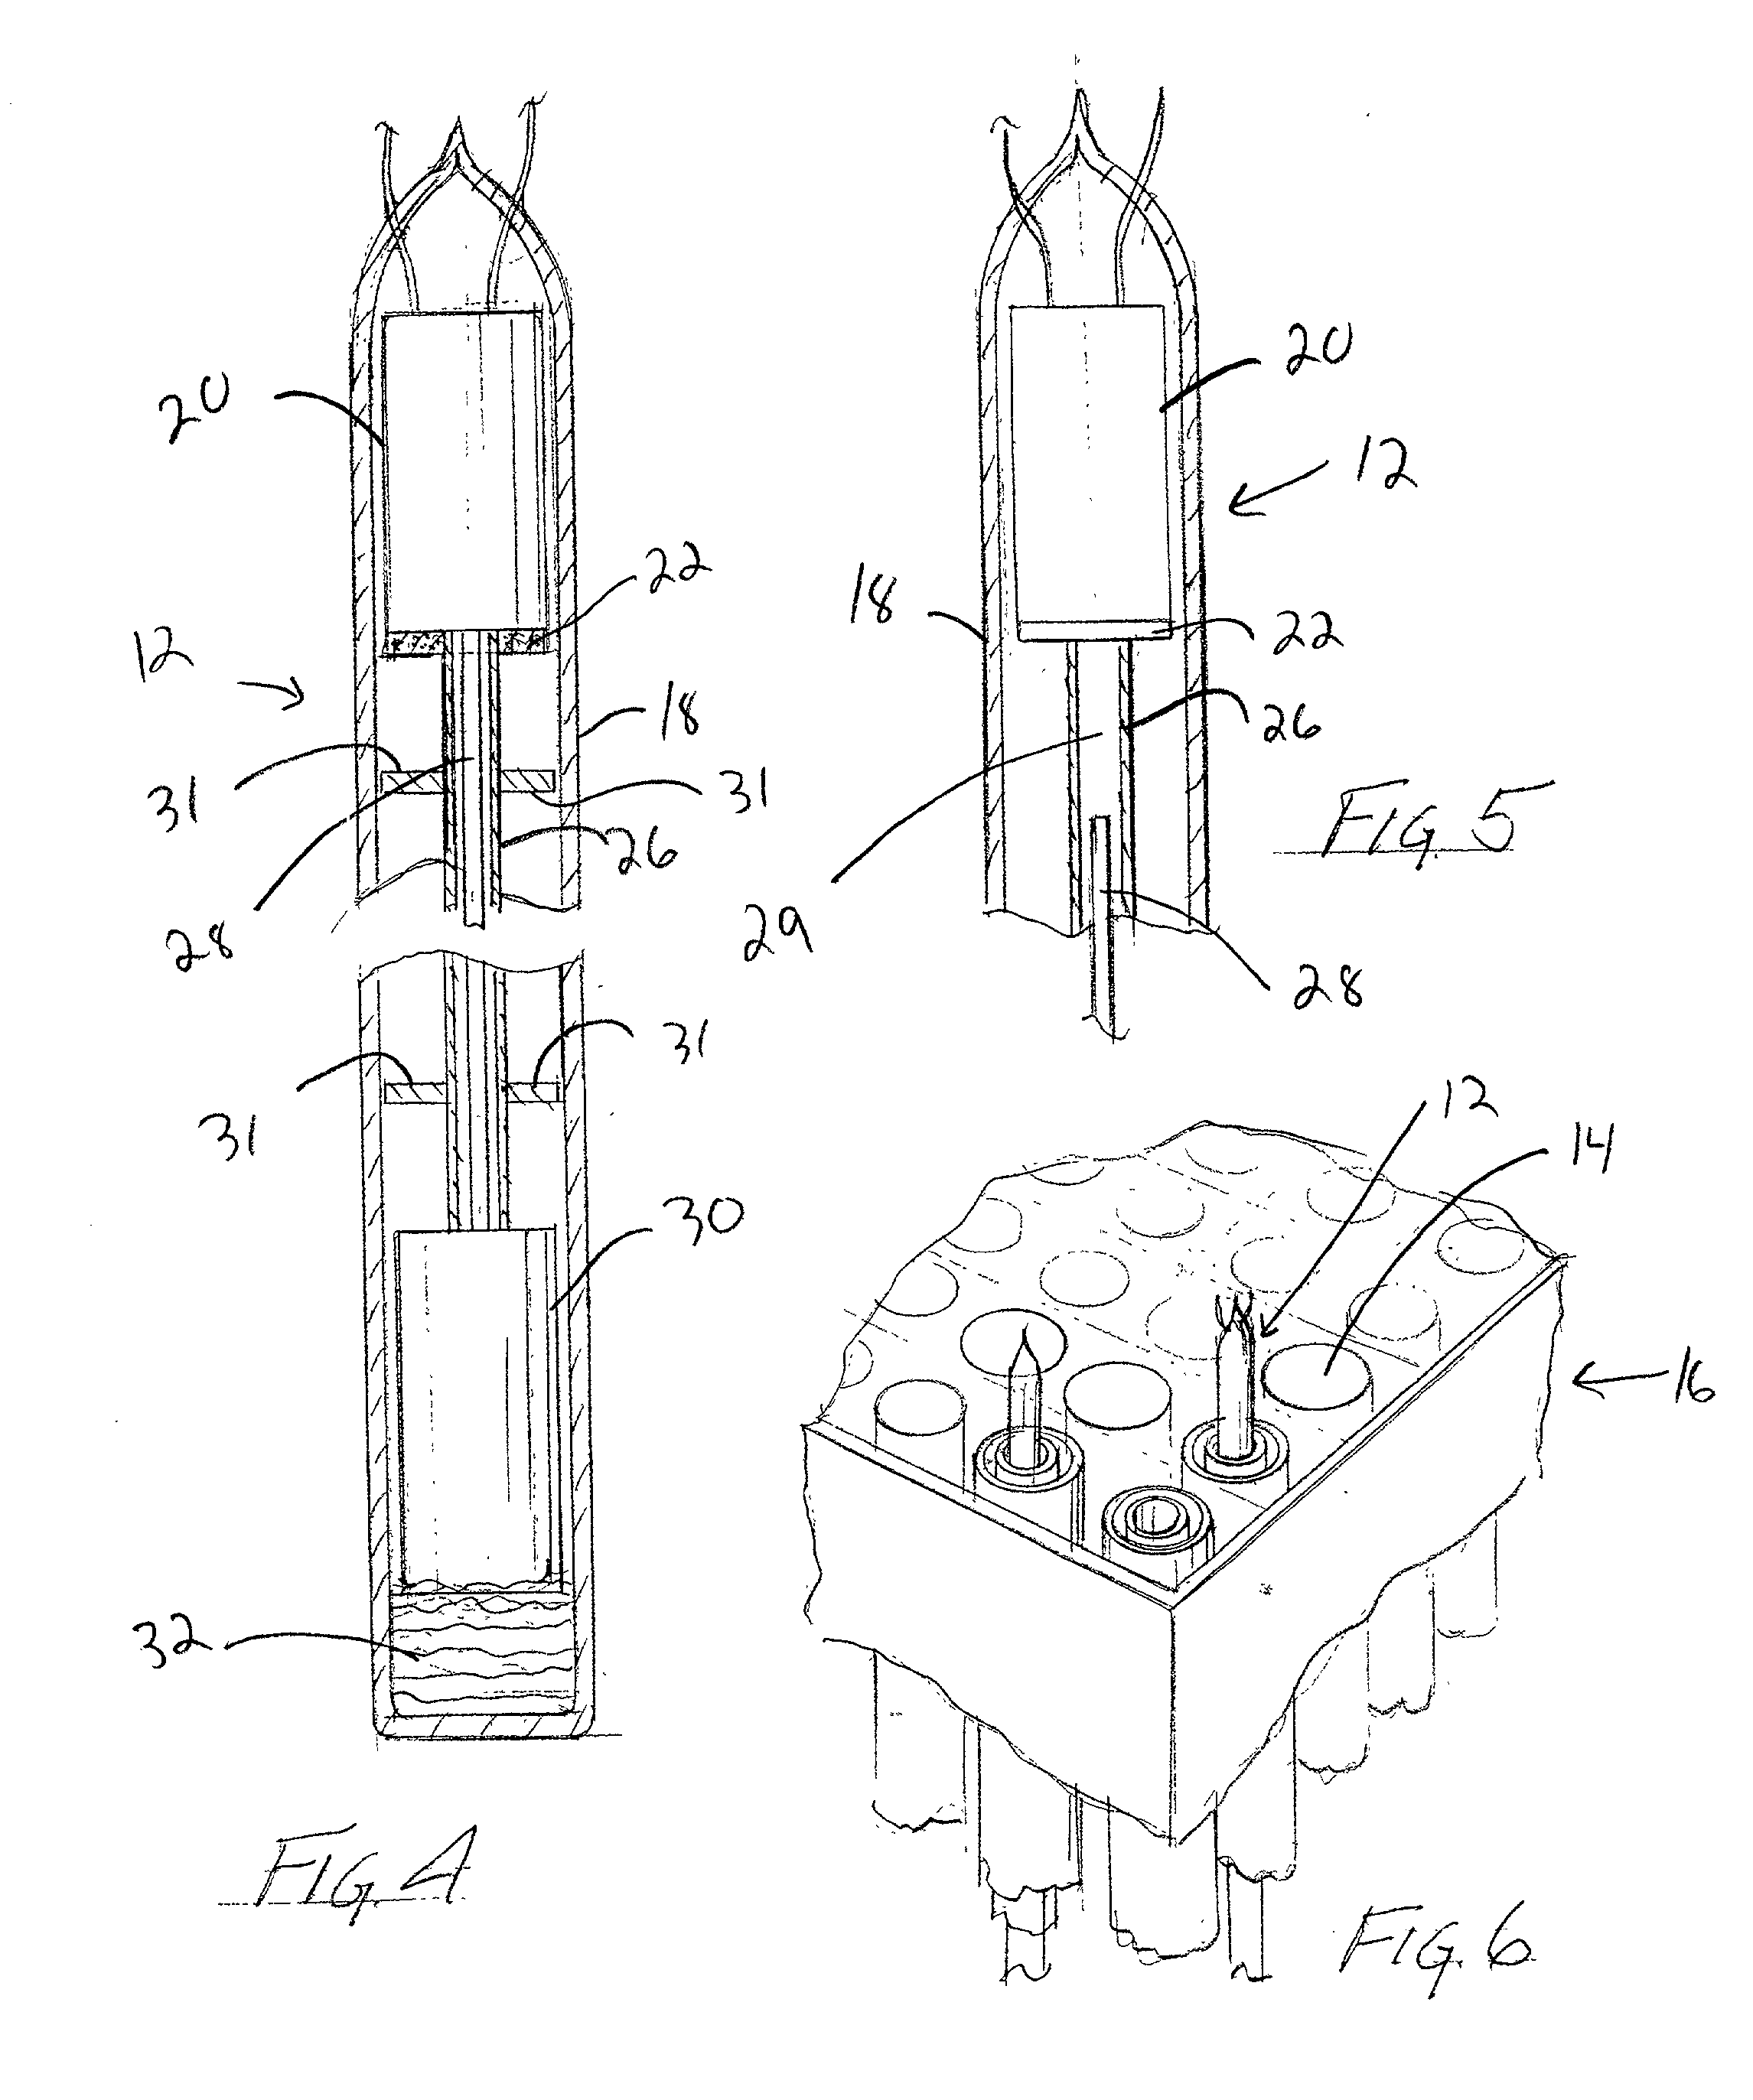 Apparatus and method for generating ozone